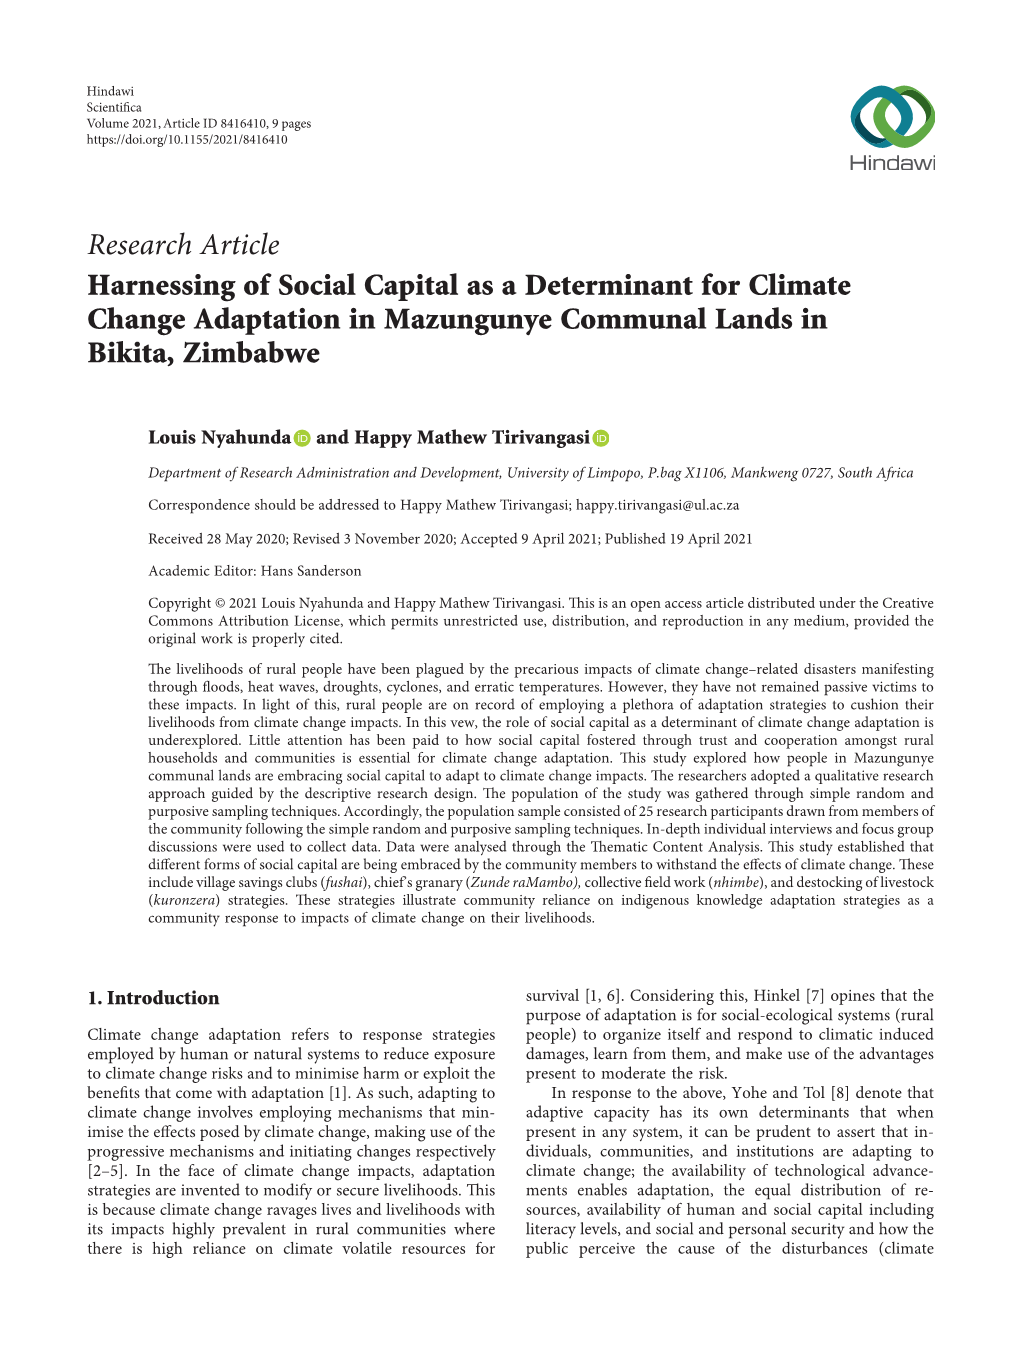 Harnessing of Social Capital As a Determinant for Climate Change Adaptation in Mazungunye Communal Lands in Bikita, Zimbabwe